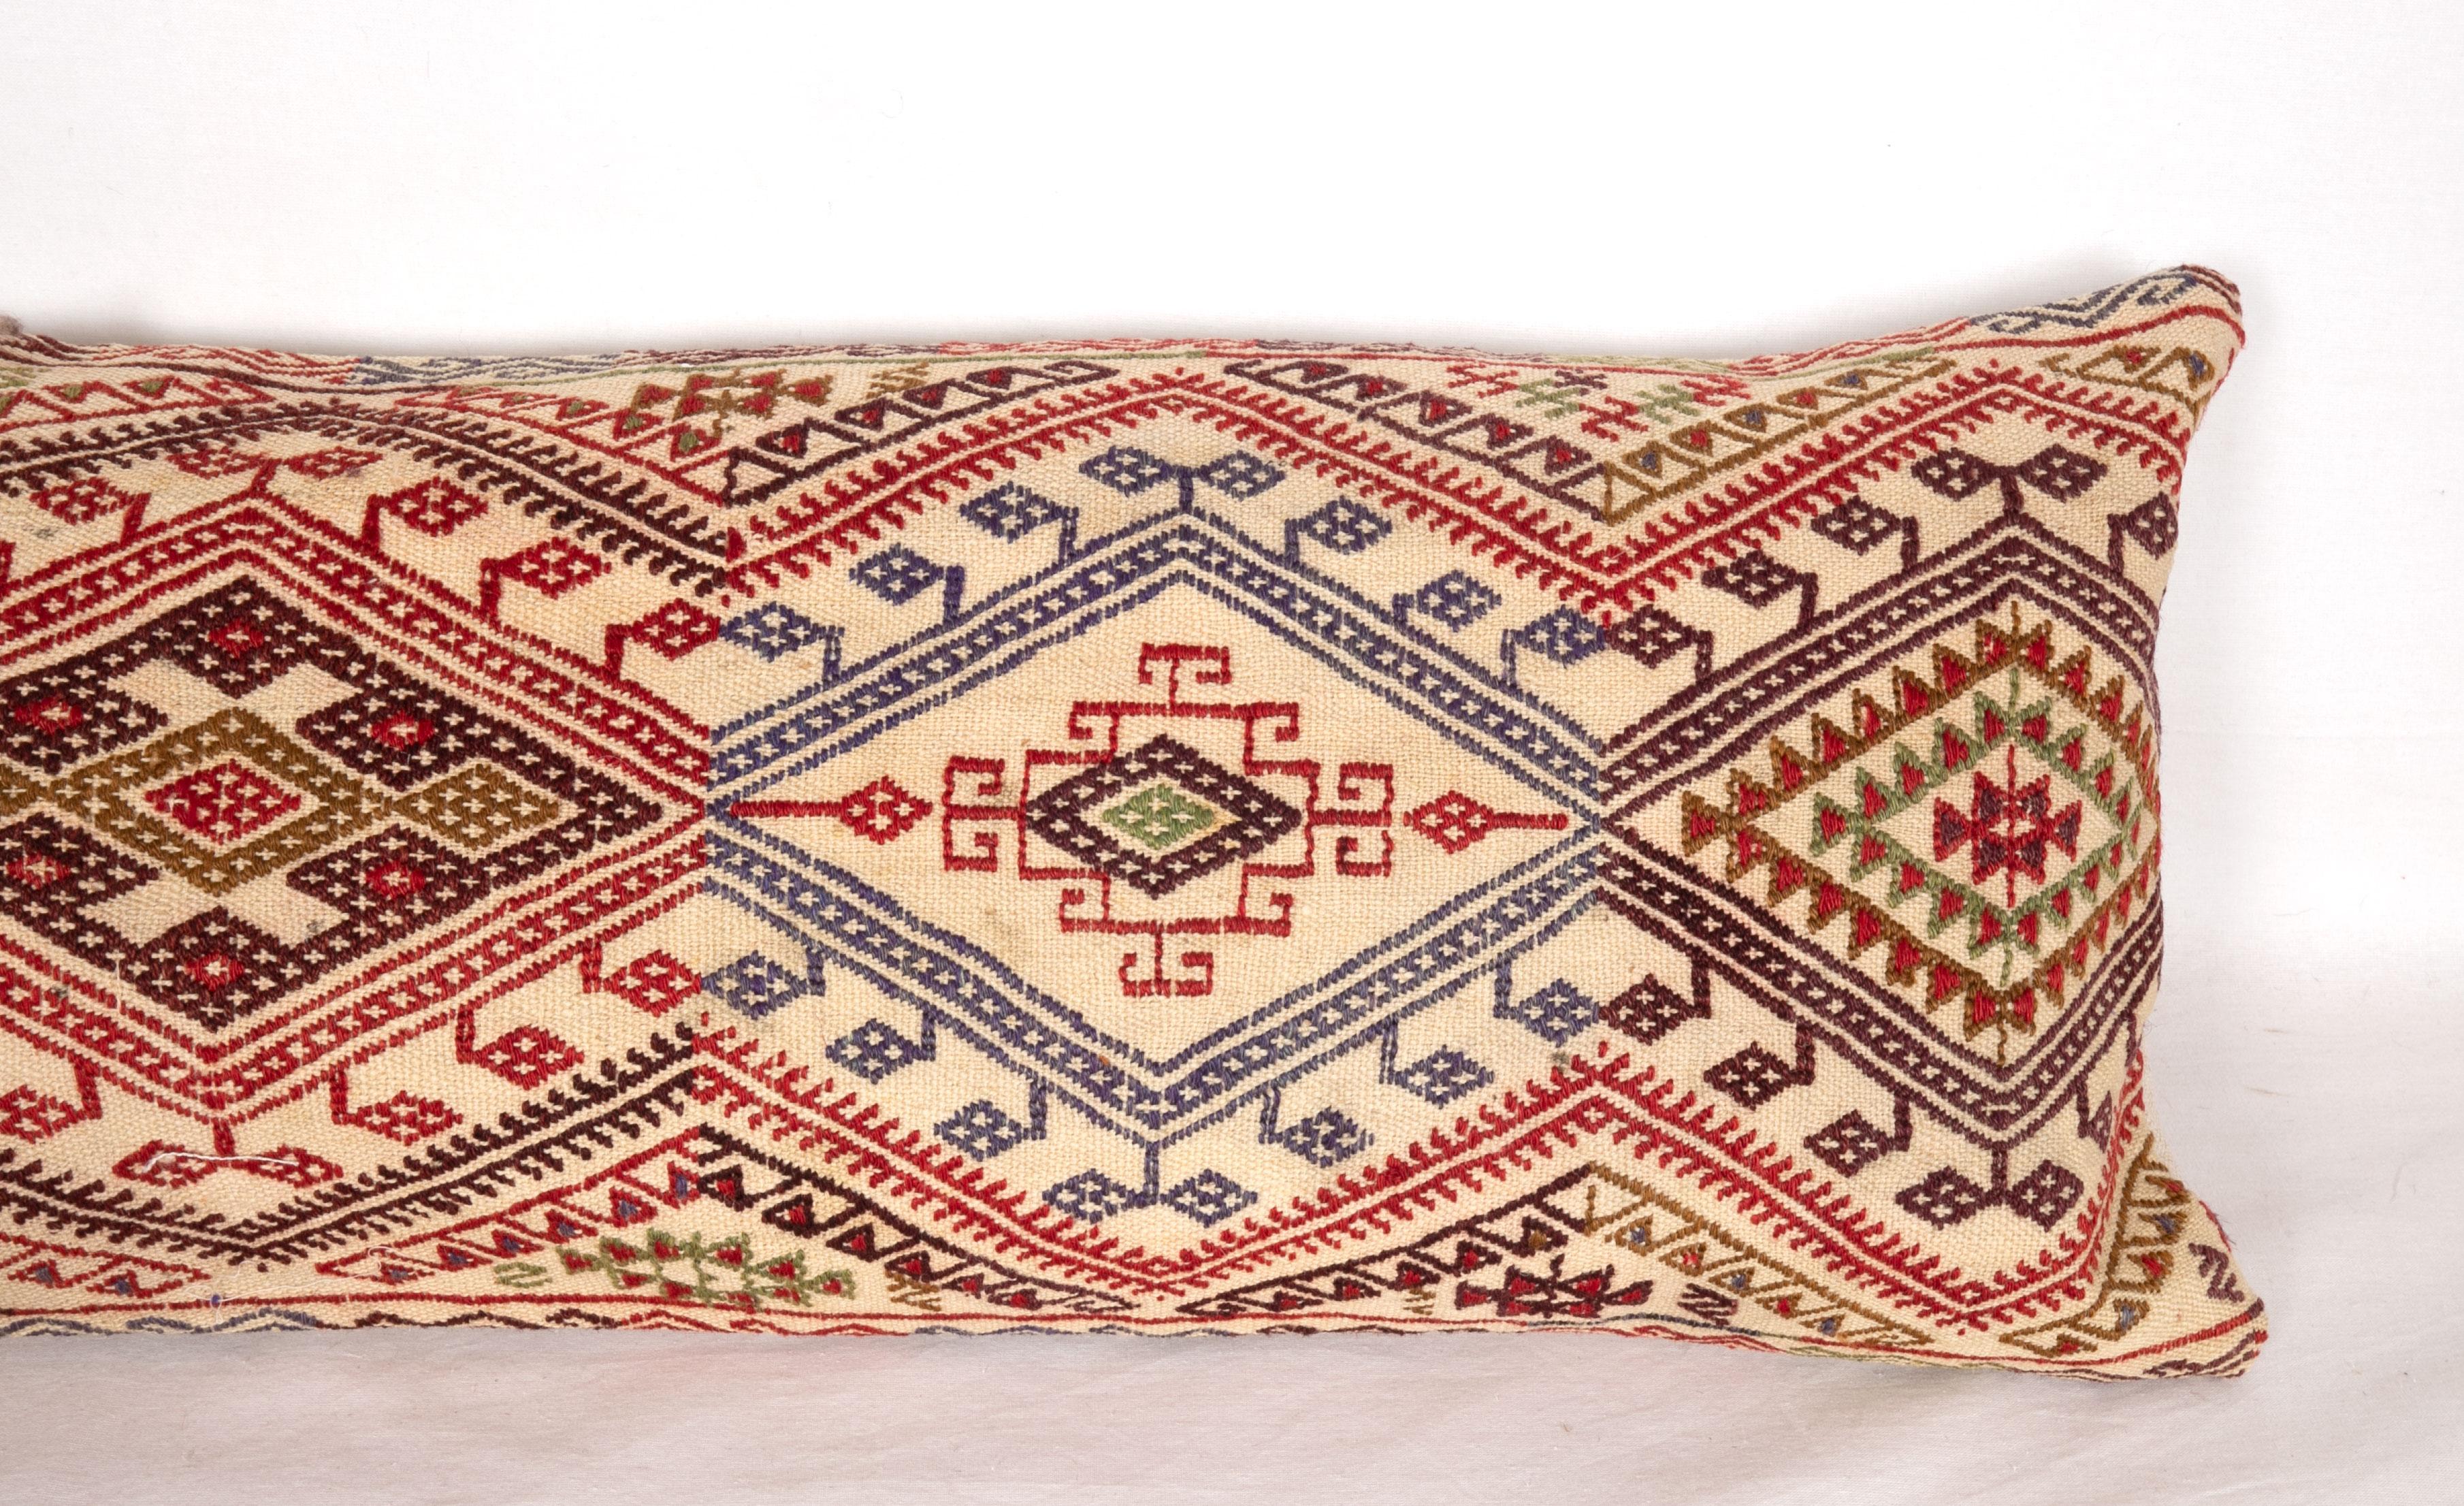 Hand-Woven Cicim Body Pillow Fashioned from an Anatolian Cicim Kilim, 1930s